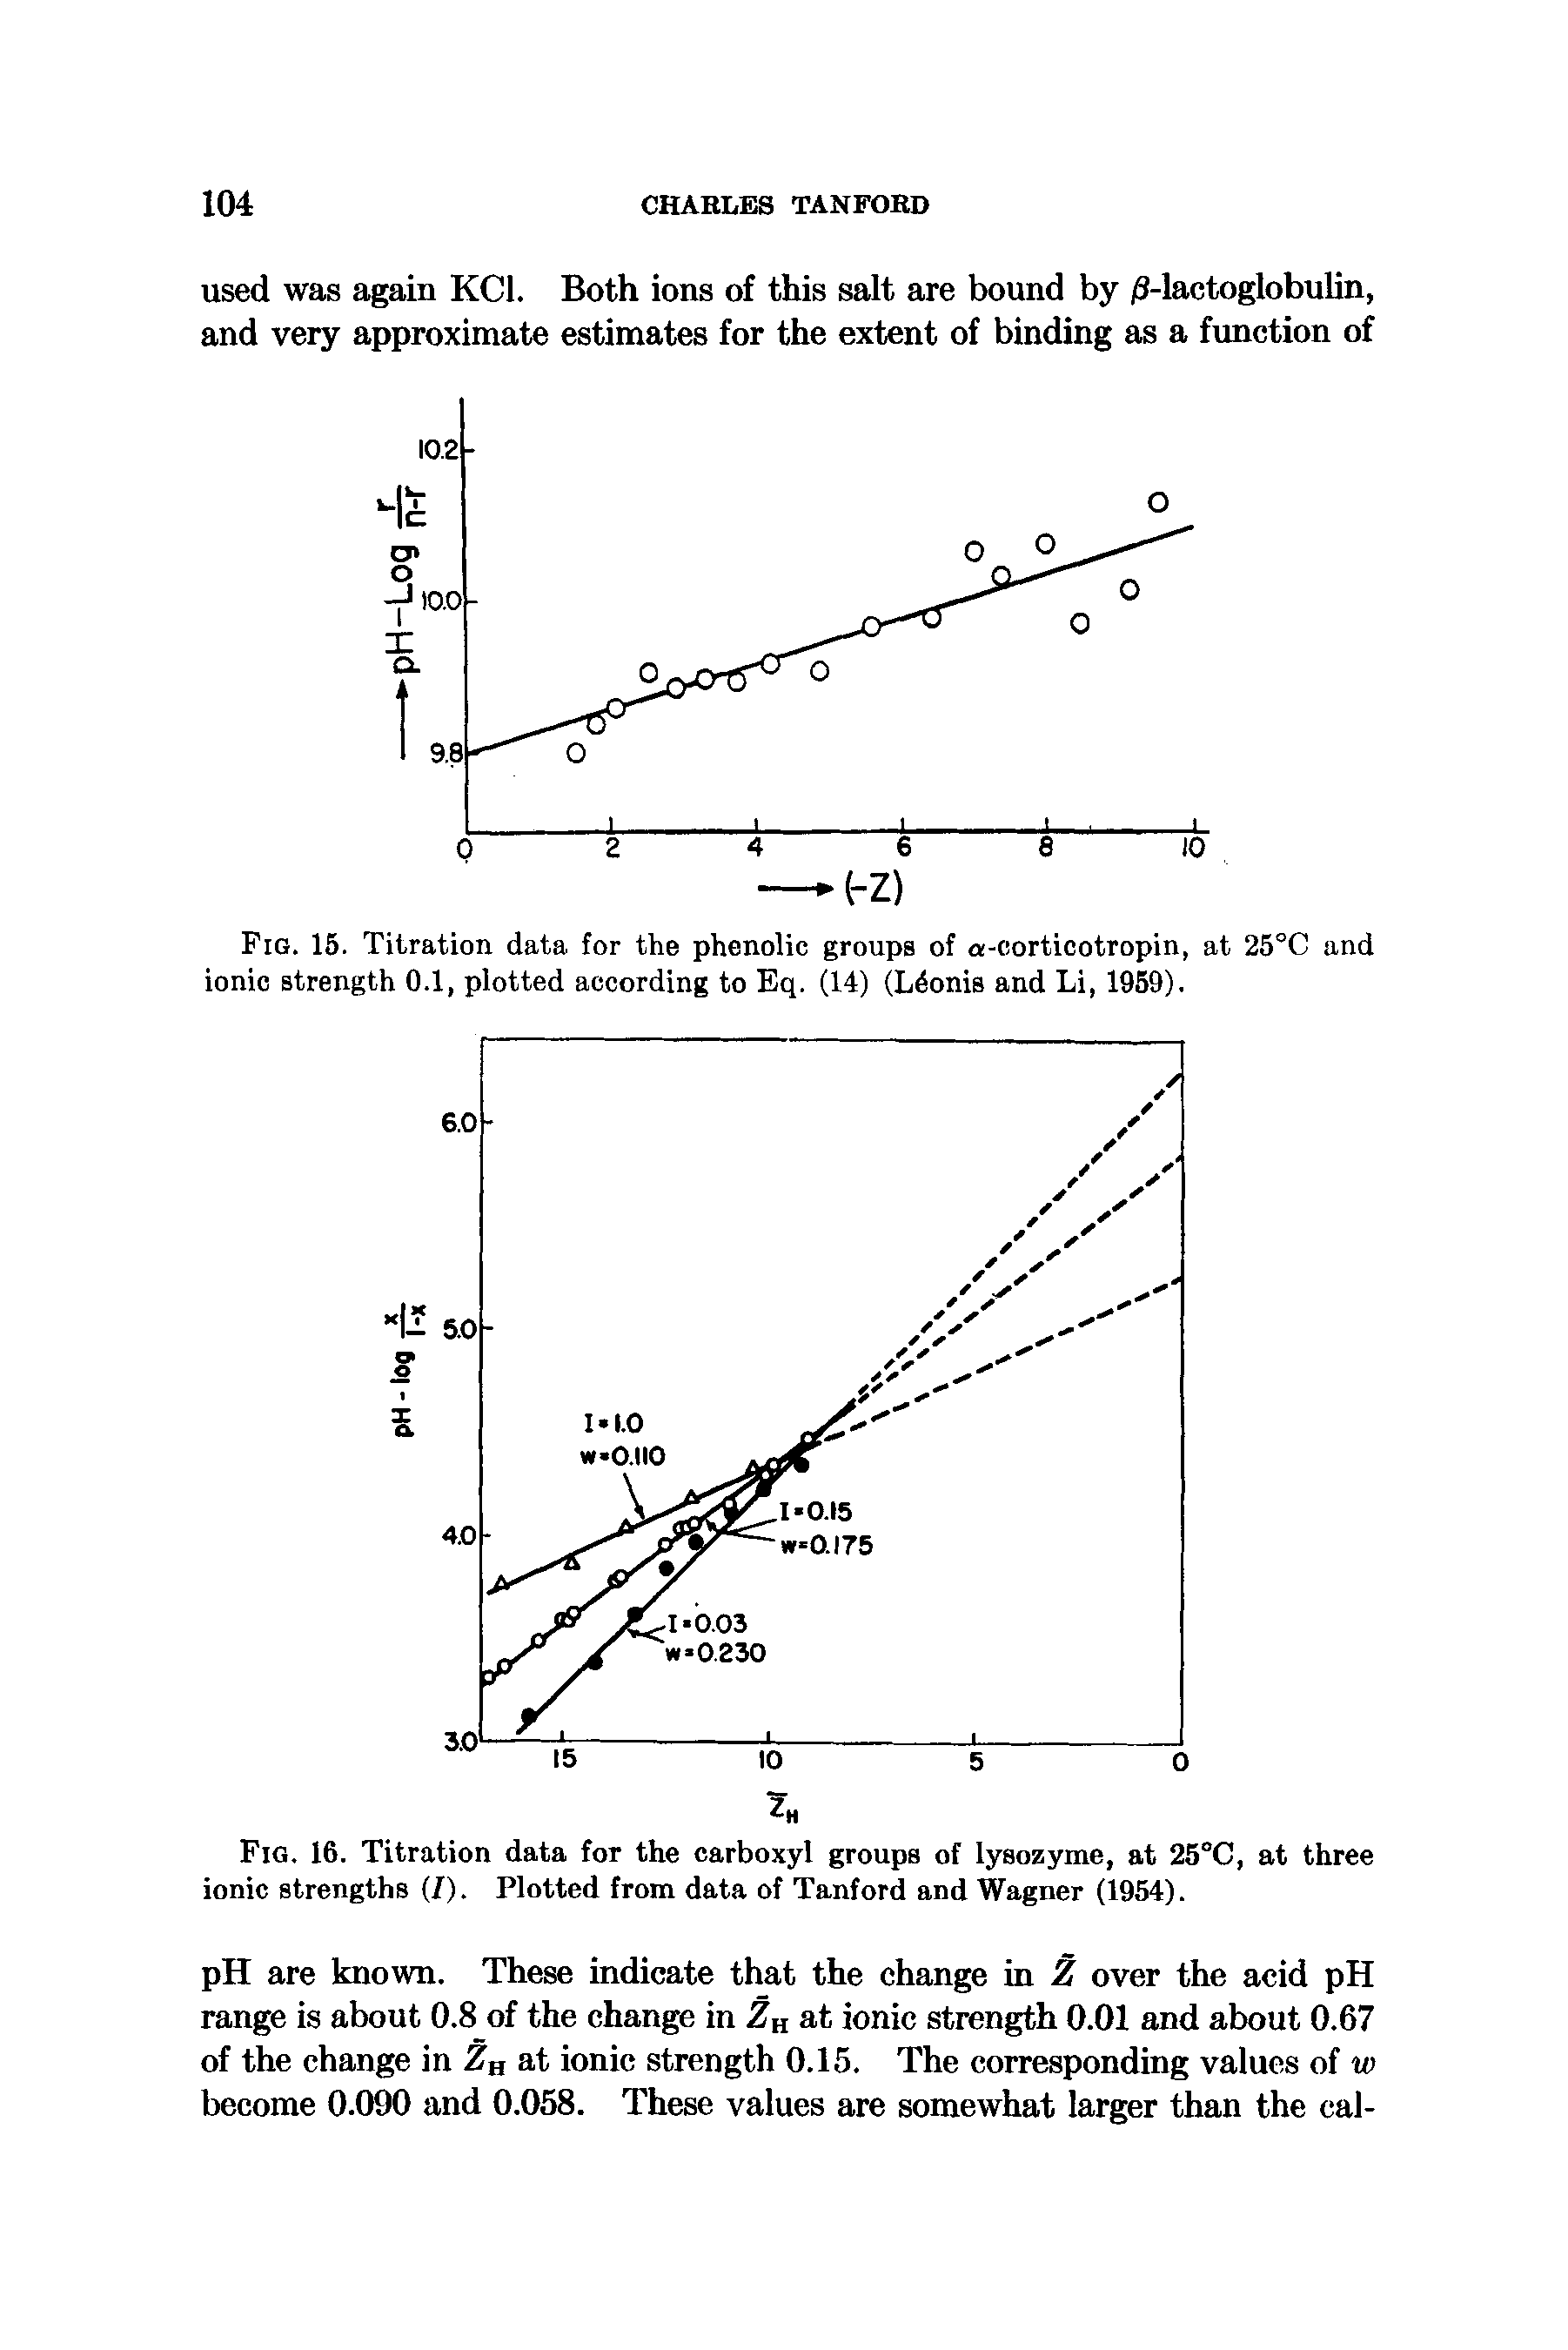 Fig. 16. Titration data for the carboxyl groups of lysozyme, at 25°C, at three ionic strengths (/). Plotted from data of Tanford and Wagner (1954).